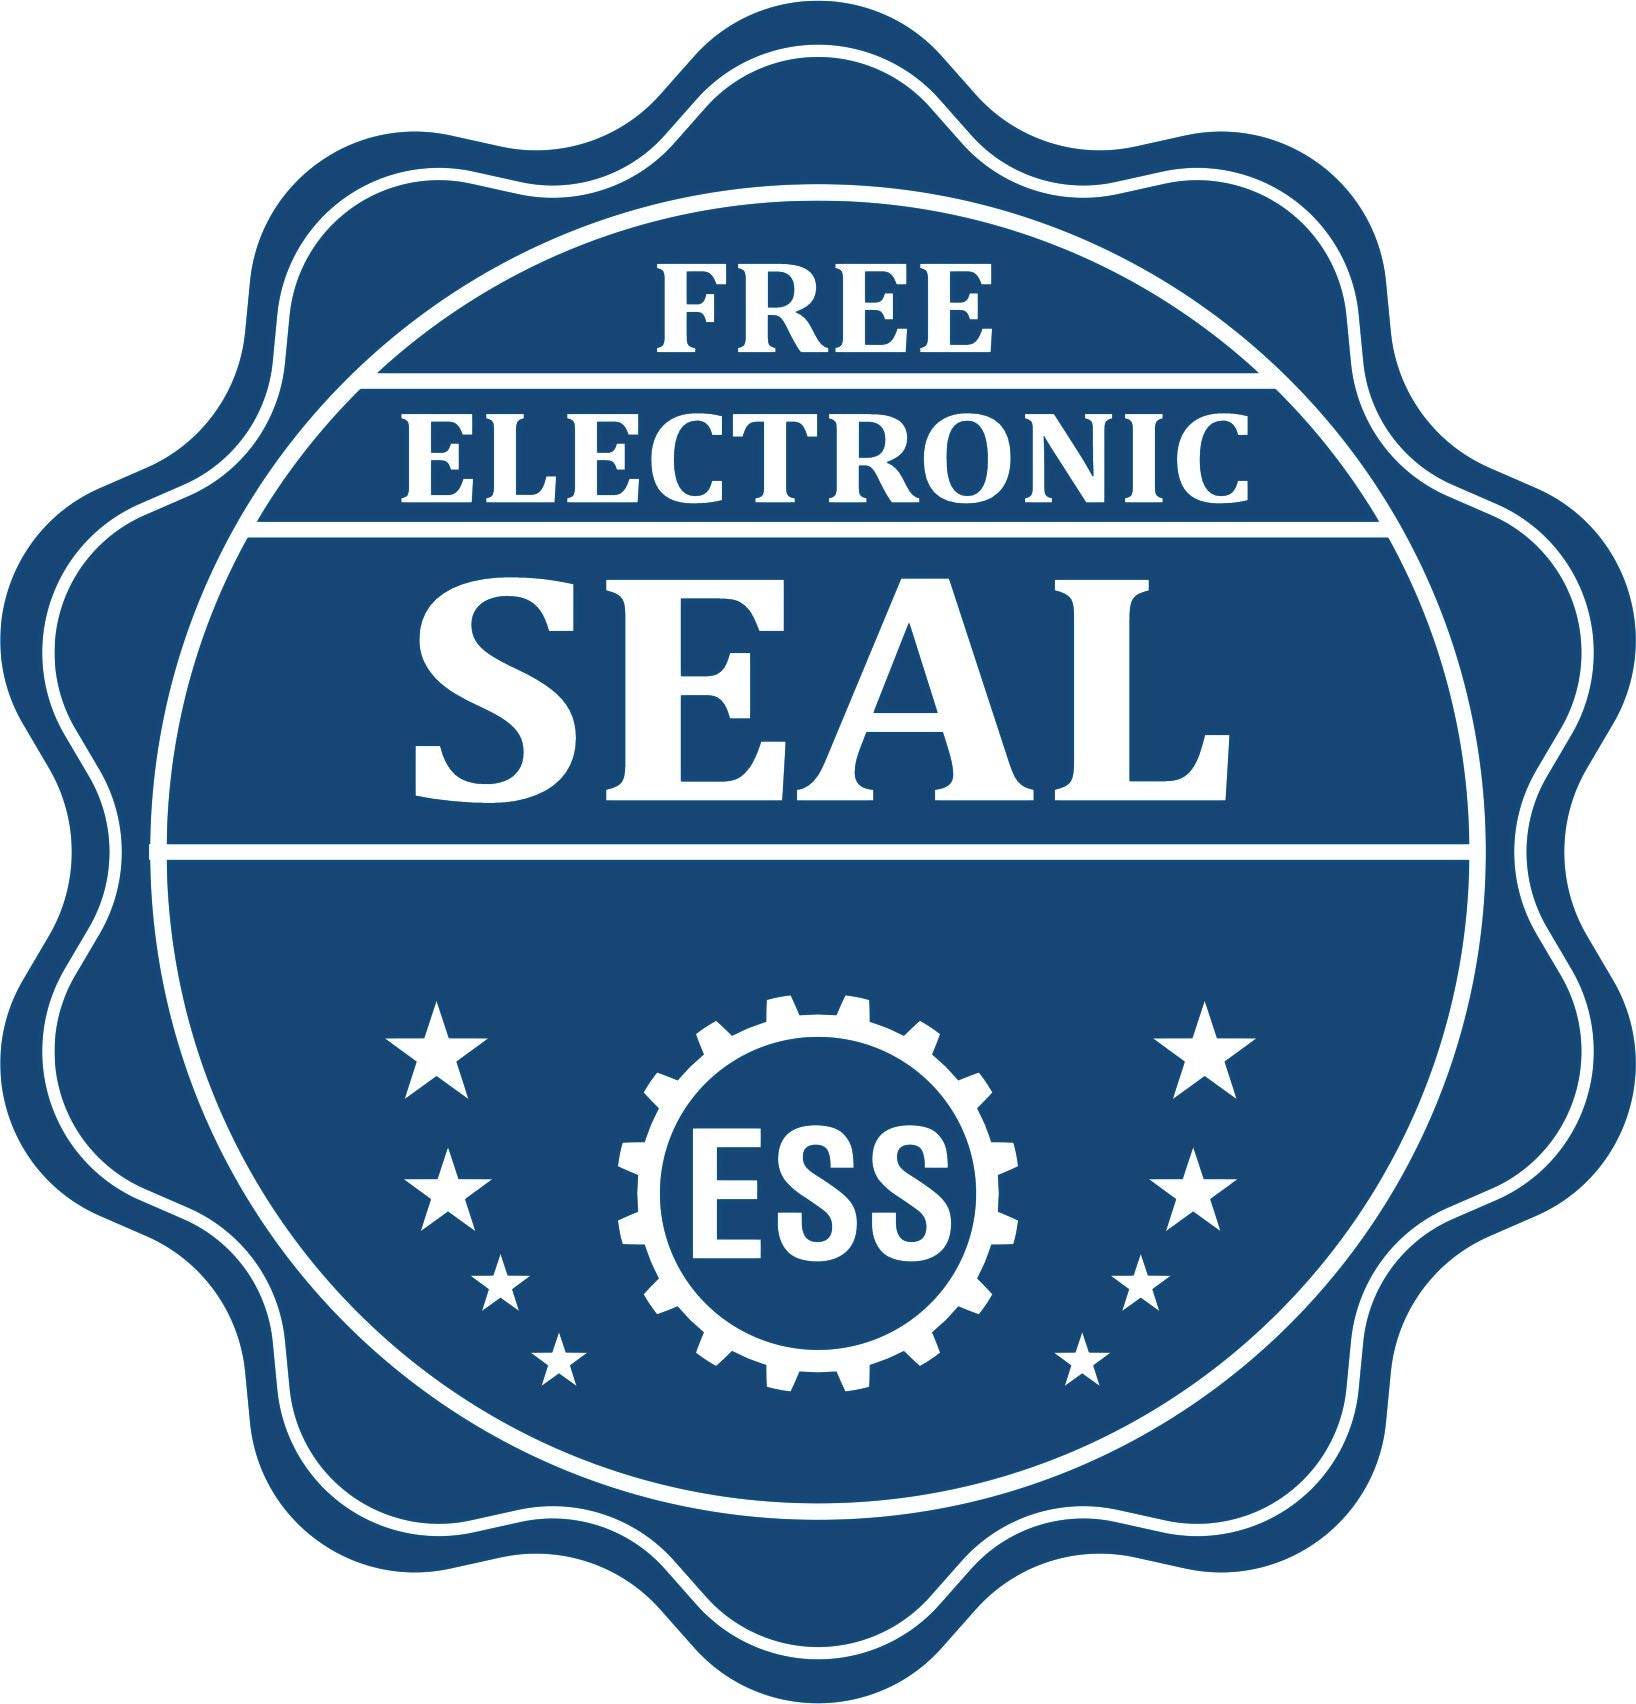 A badge showing a free electronic seal for the Long Reach Wisconsin PE Seal with stars and the ESS gear on the emblem.